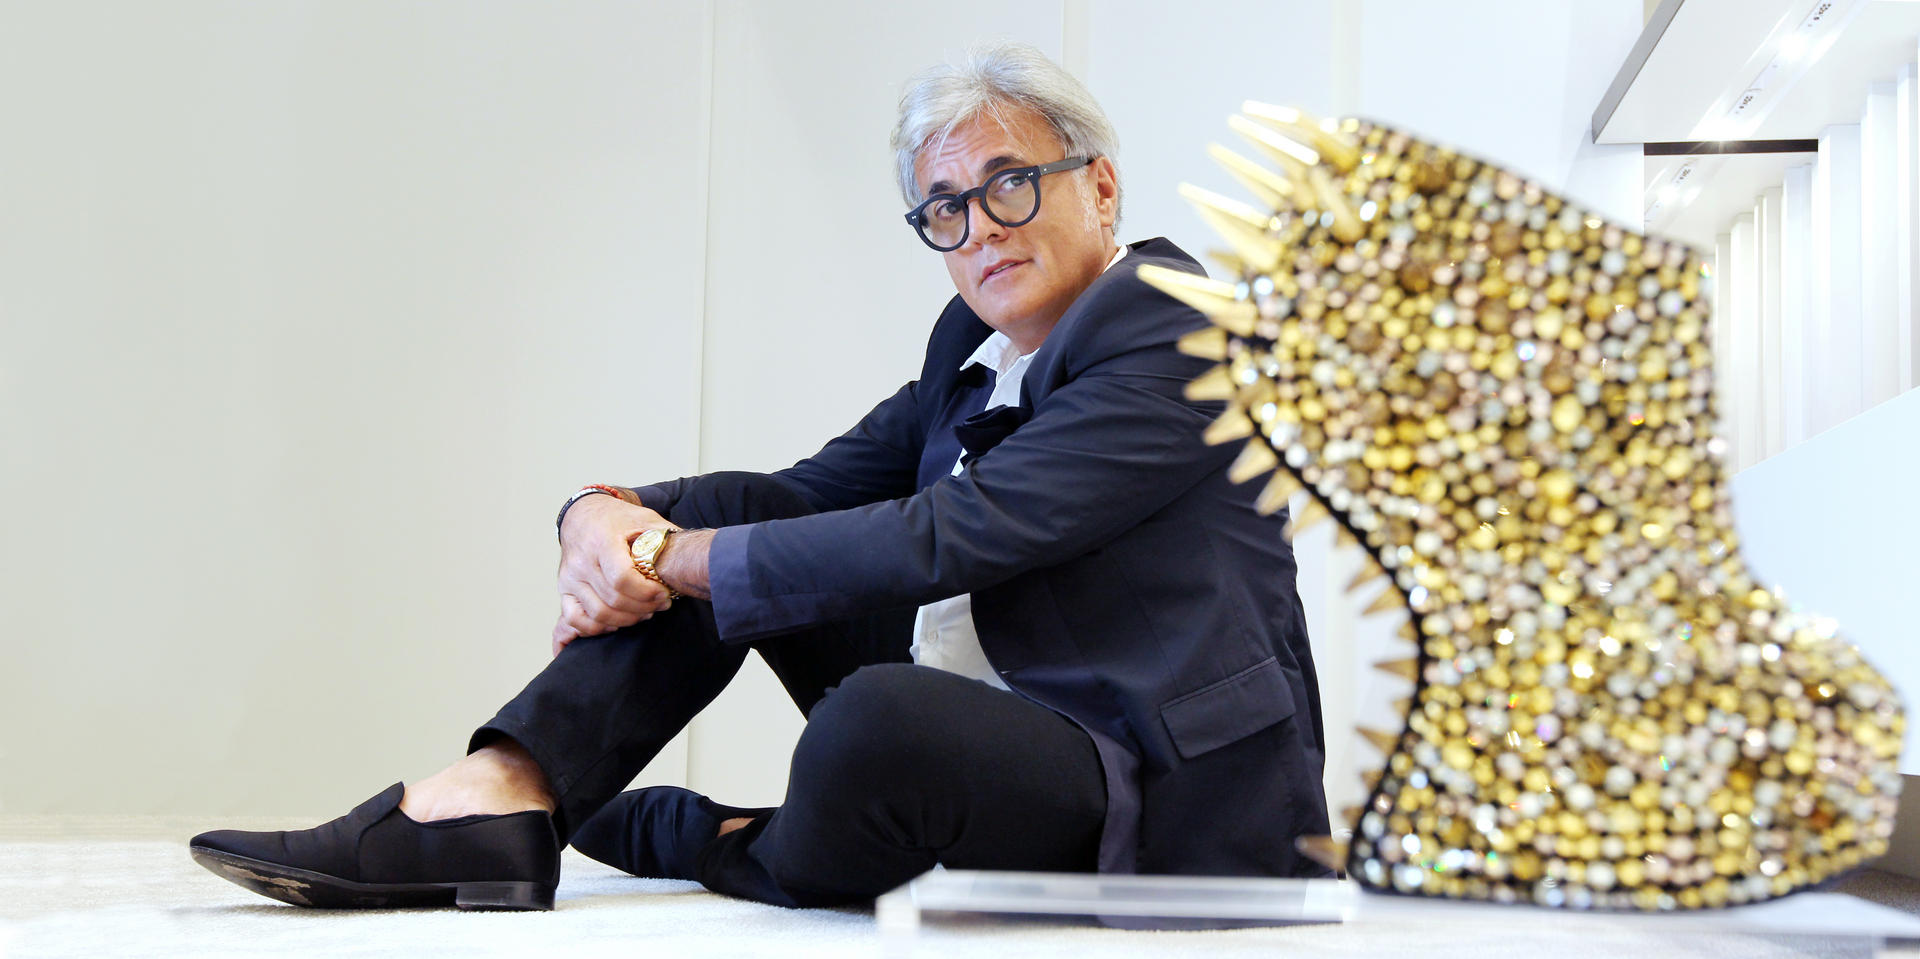 Clockwise from top right: designer Giuseppe Zanotti; a look from his new collection for men; his spring-summer 2013 collection includes two exclusive Swarovski-studded designs for Hong Kong. Photo: Nora Tam